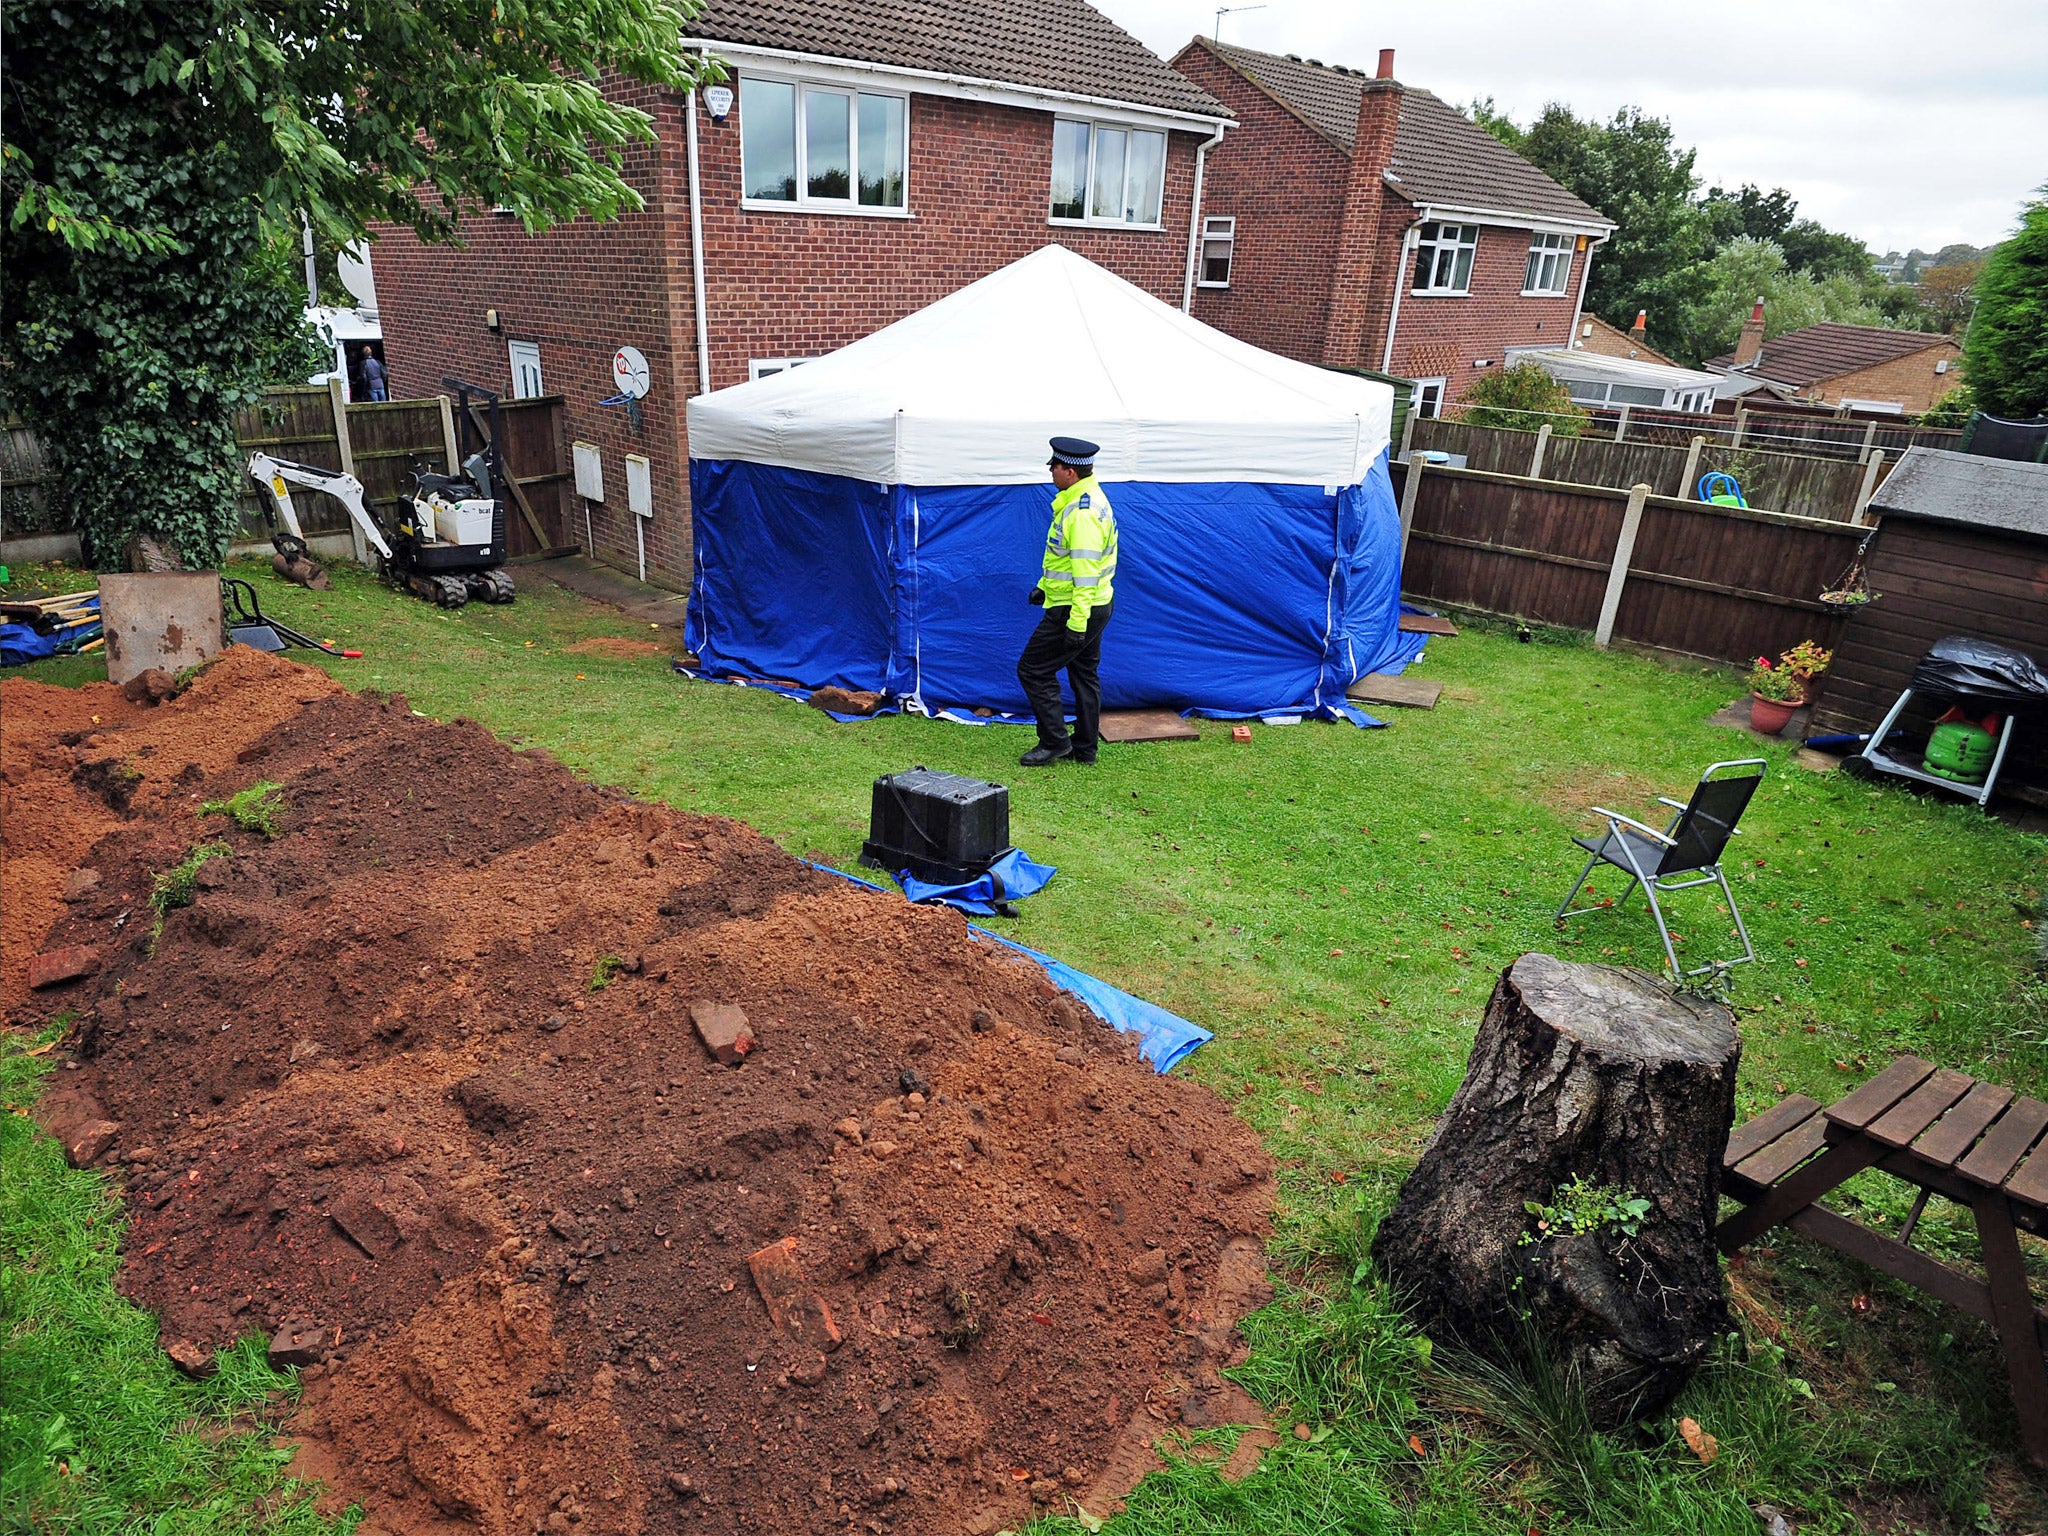 The garden where the bodies have been found